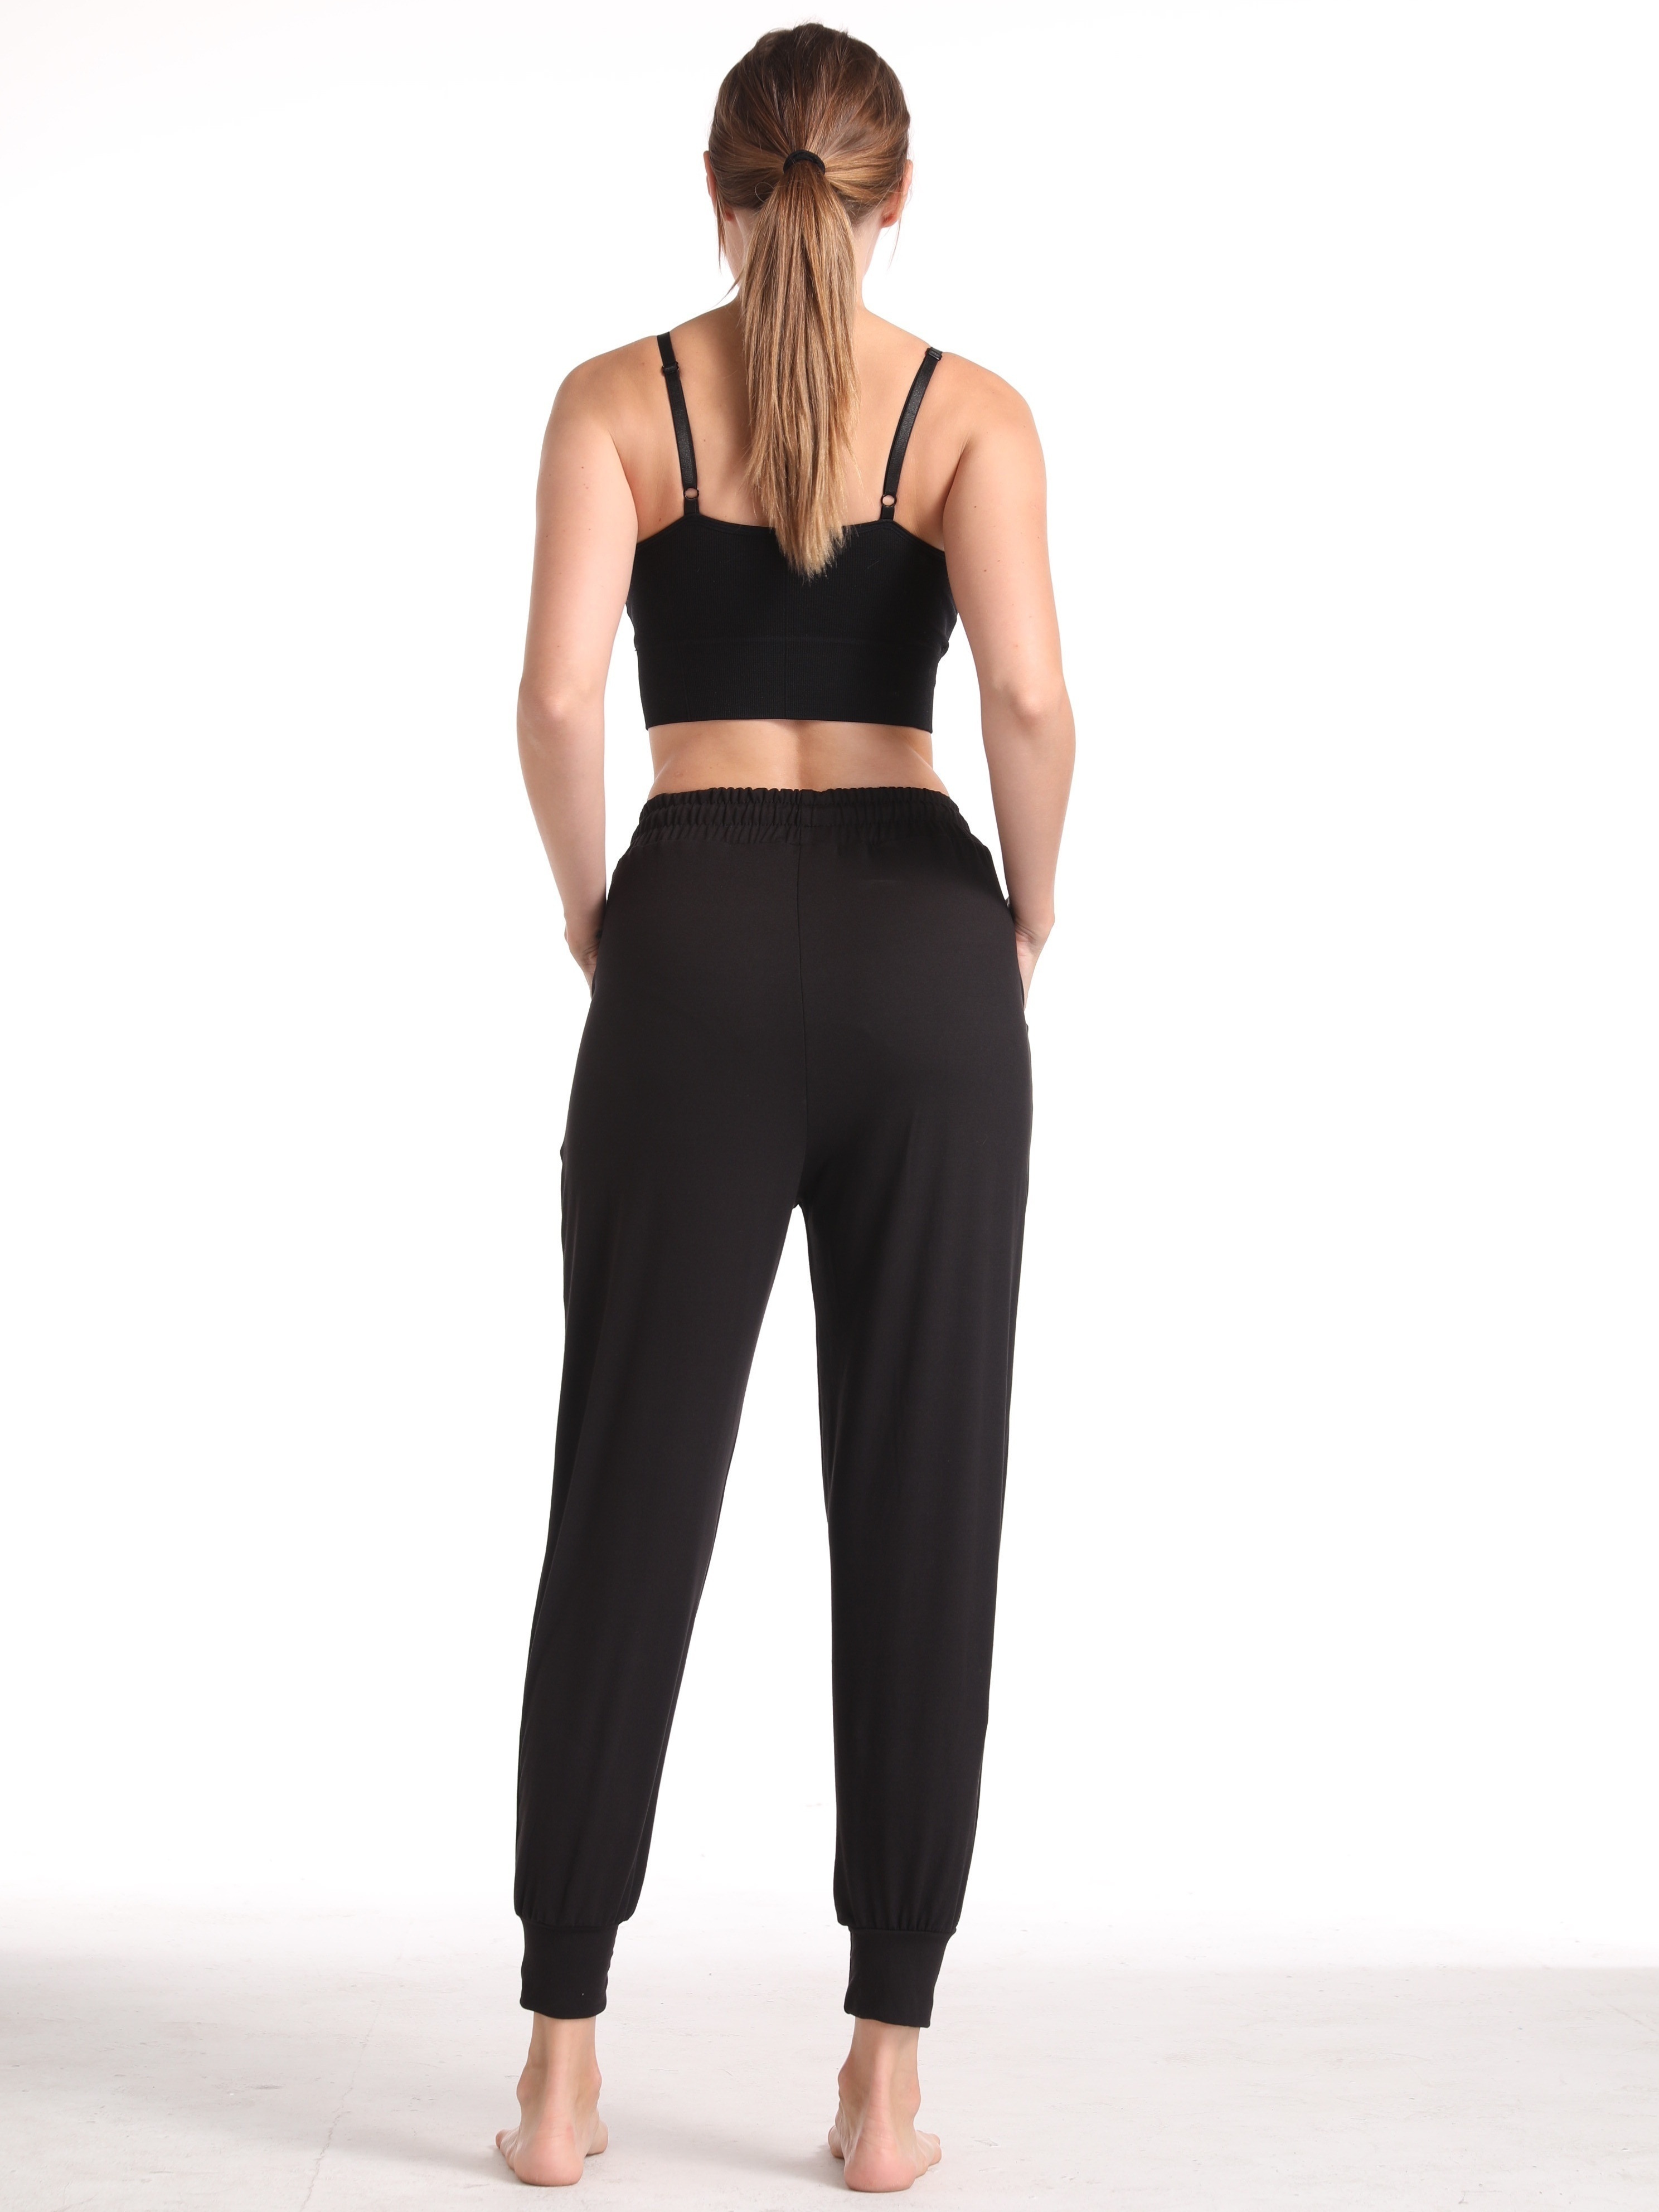 DIAOD Jogging Pants Women Black Loose Running Sport Pants for Gym  Breathable Female Training Fitness Yoga Workout Trousers (Color : Black,  Size : Medium) price in UAE,  UAE